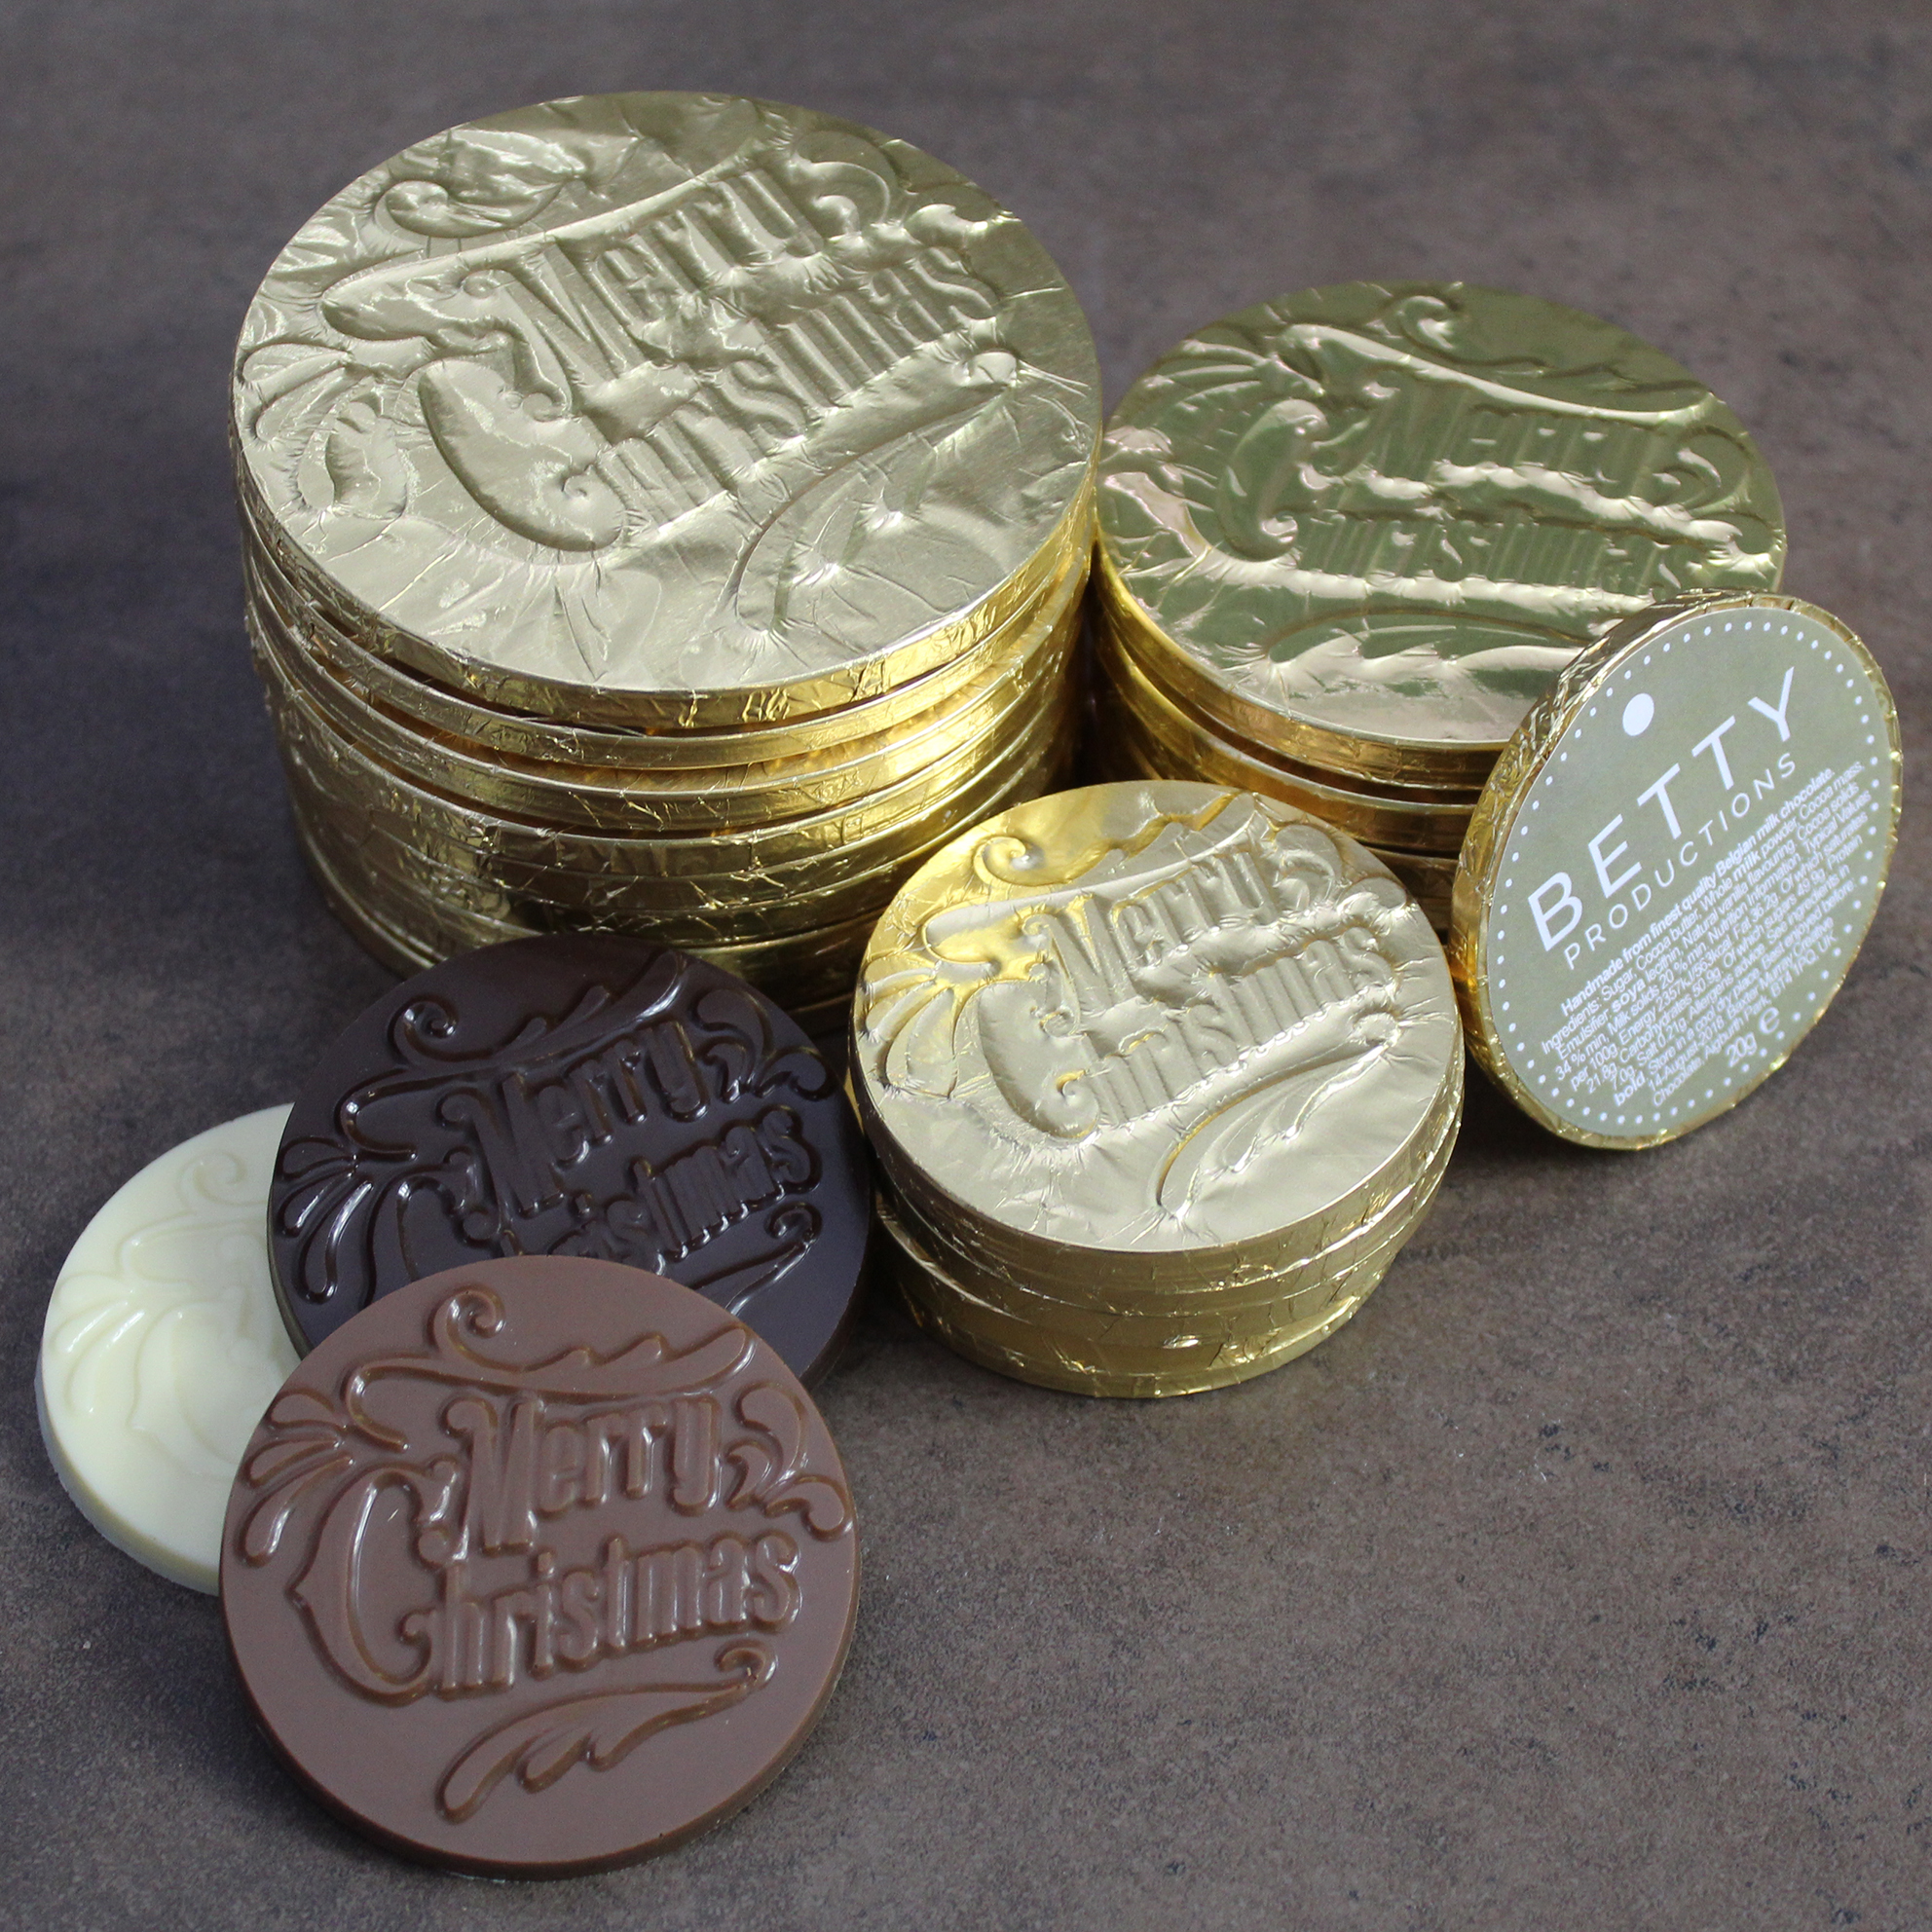 Why Do We Give Chocolate Coins at Christmas ?